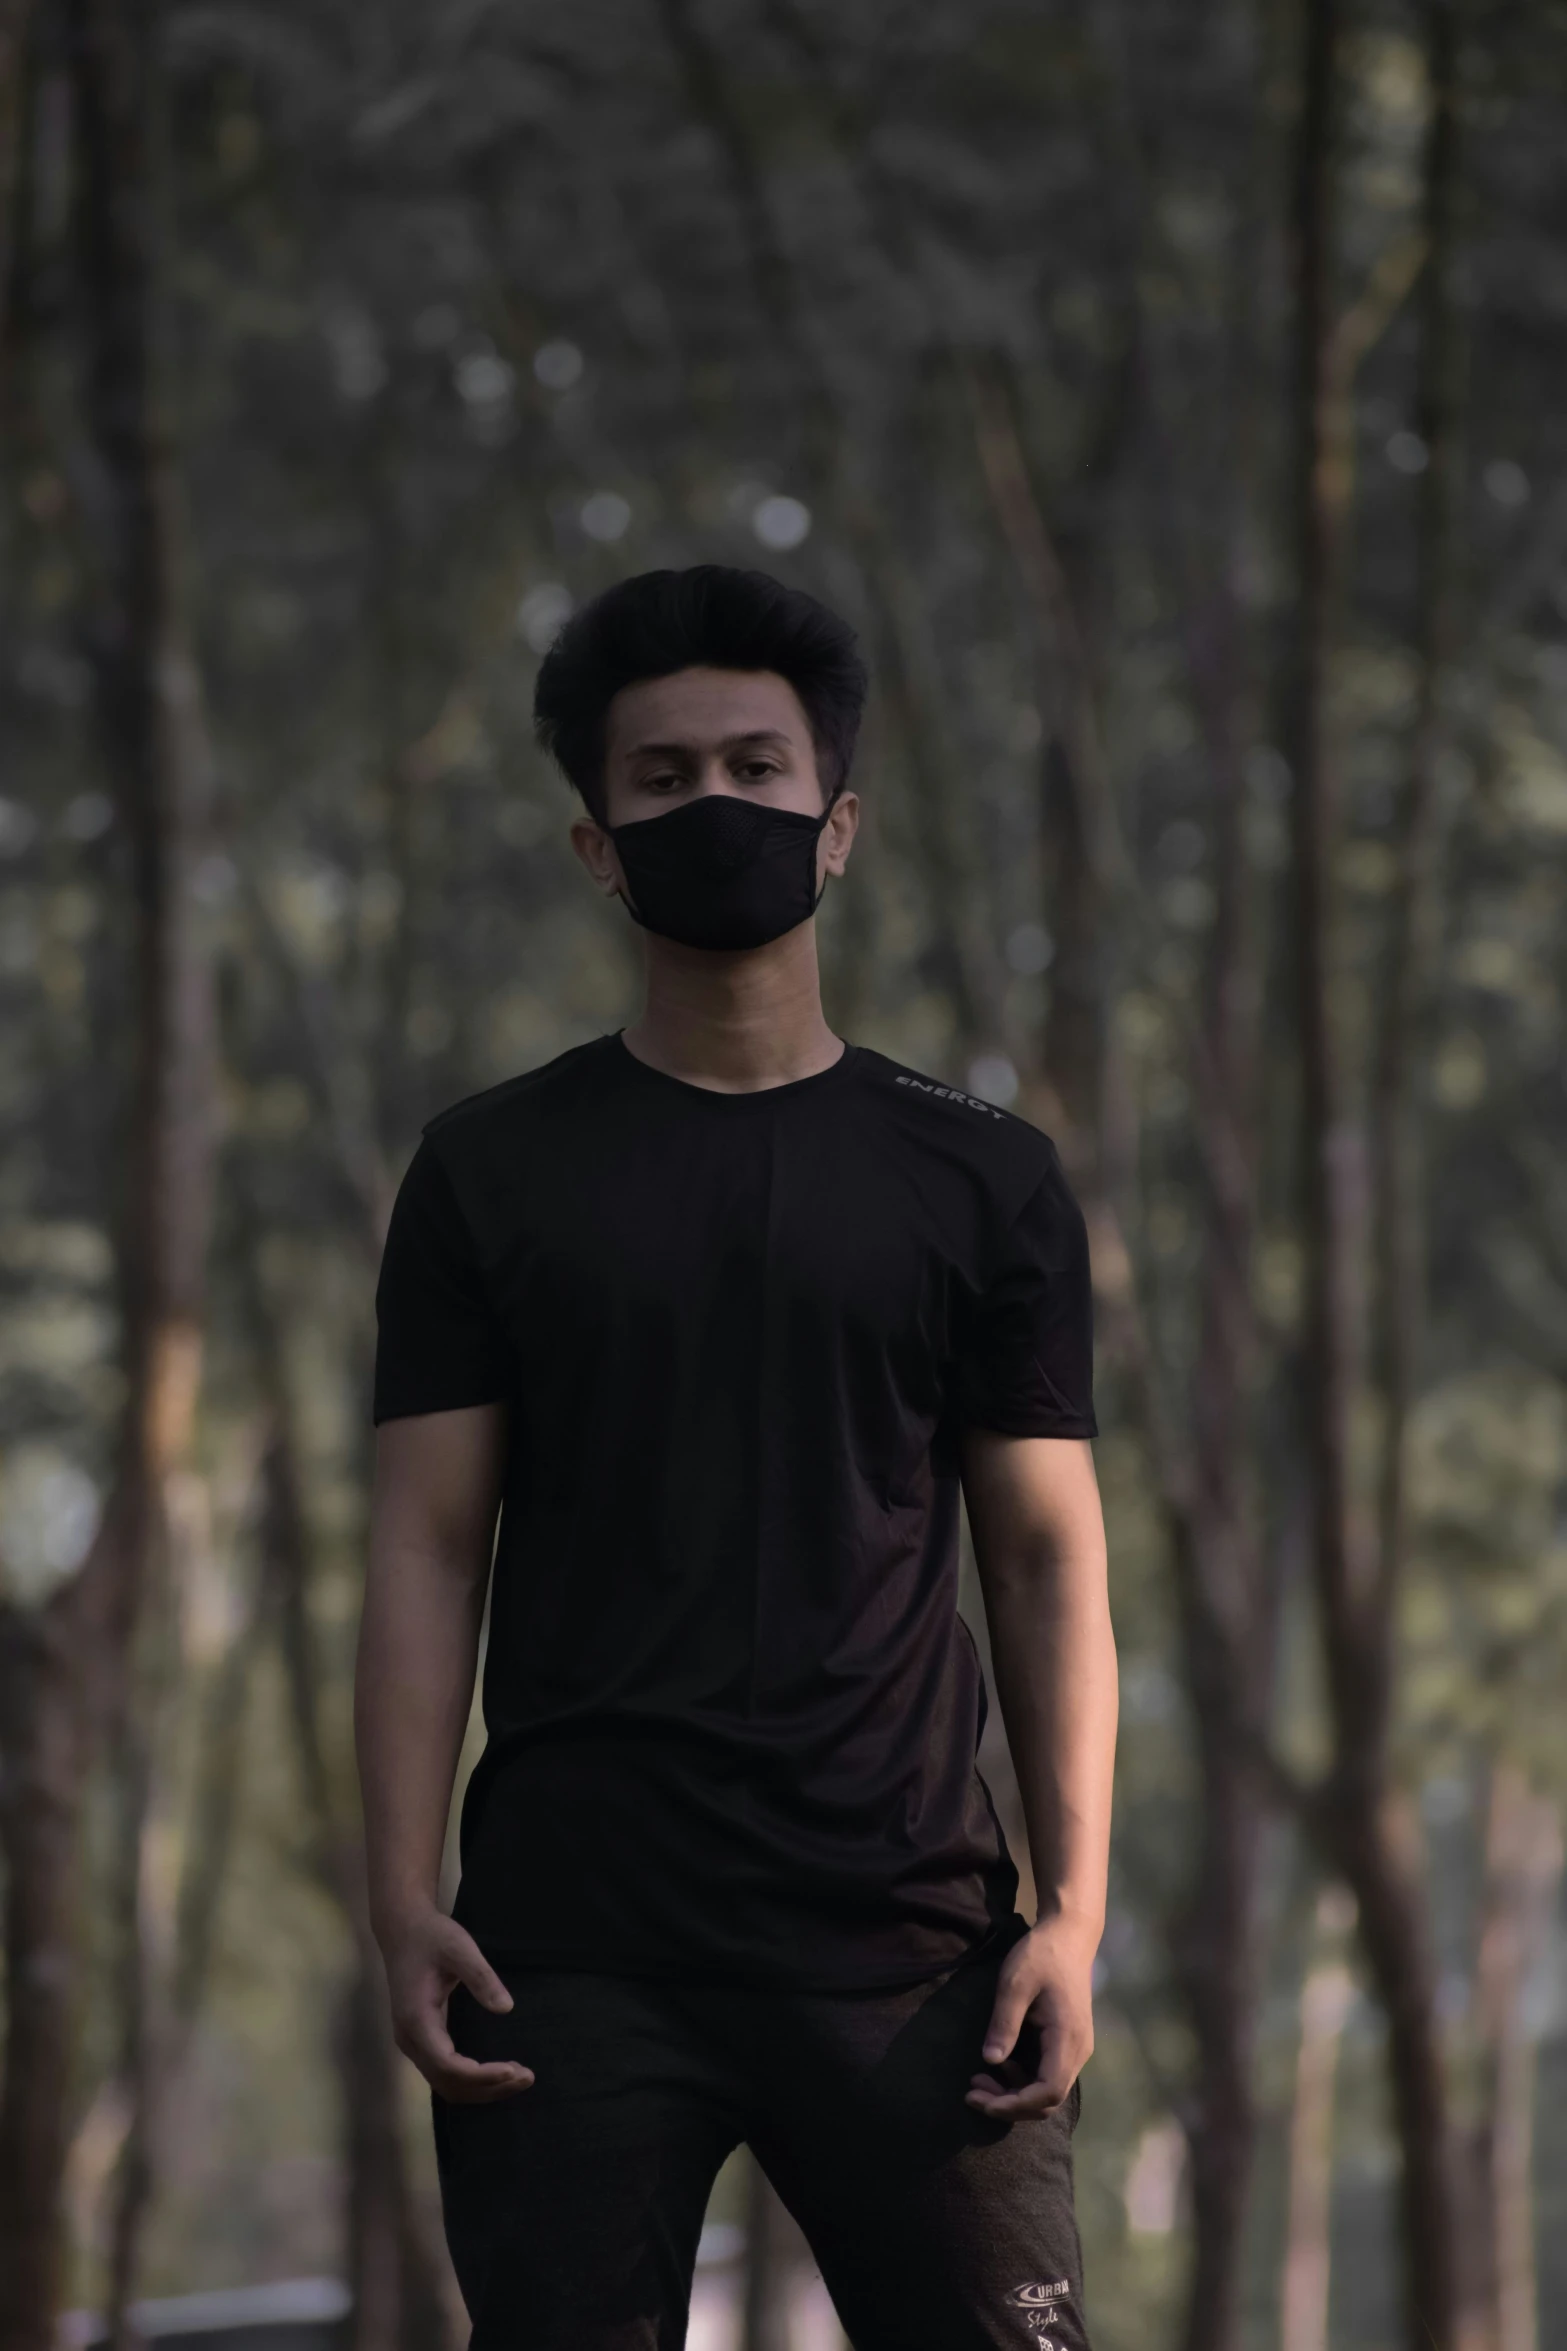 man wearing black shirt and mask in park